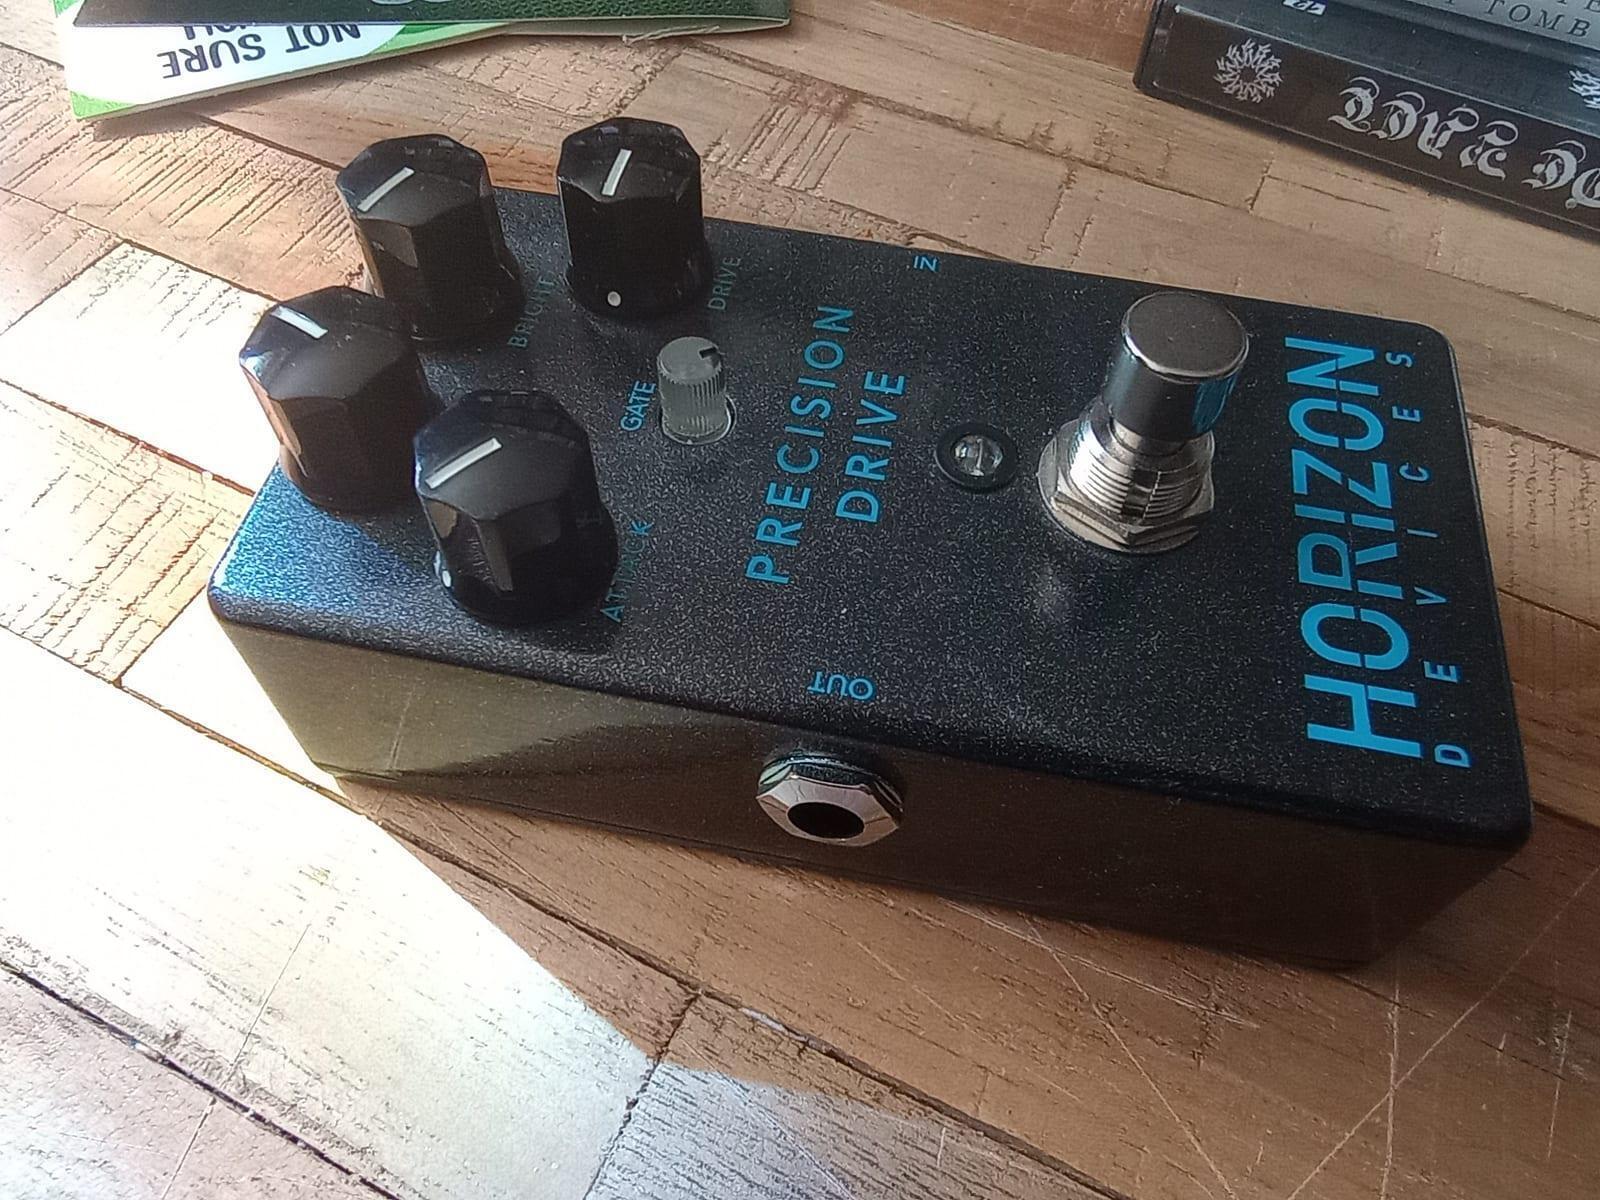 Used Horizon Devices Precision Drive black - Sweetwater's Gear